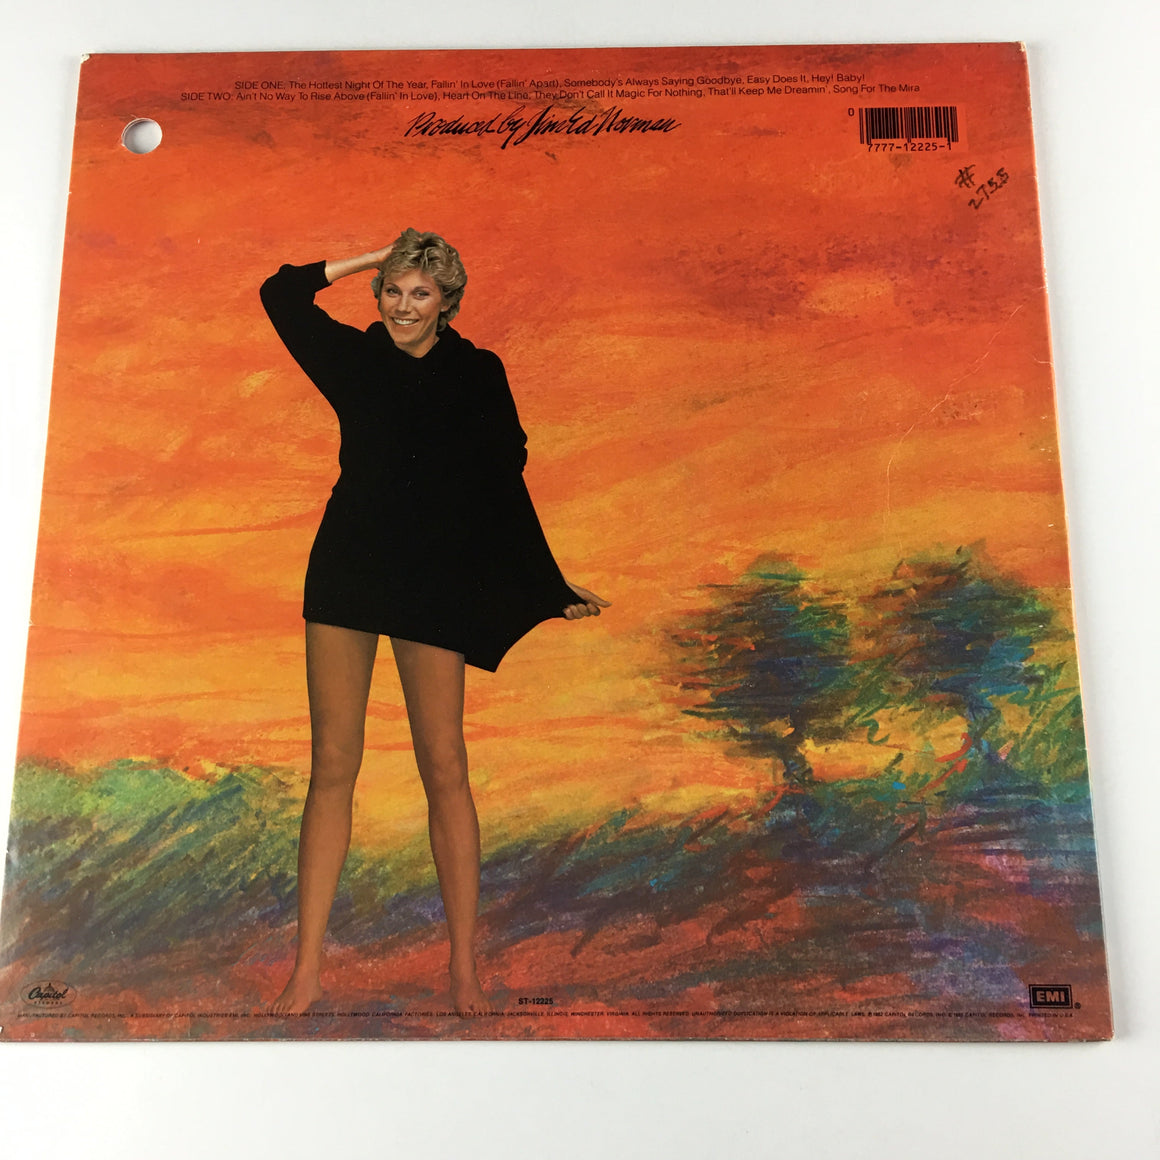 Anne Murray The Hottest Night Of The Year Used Vinyl LP VG+\VG+